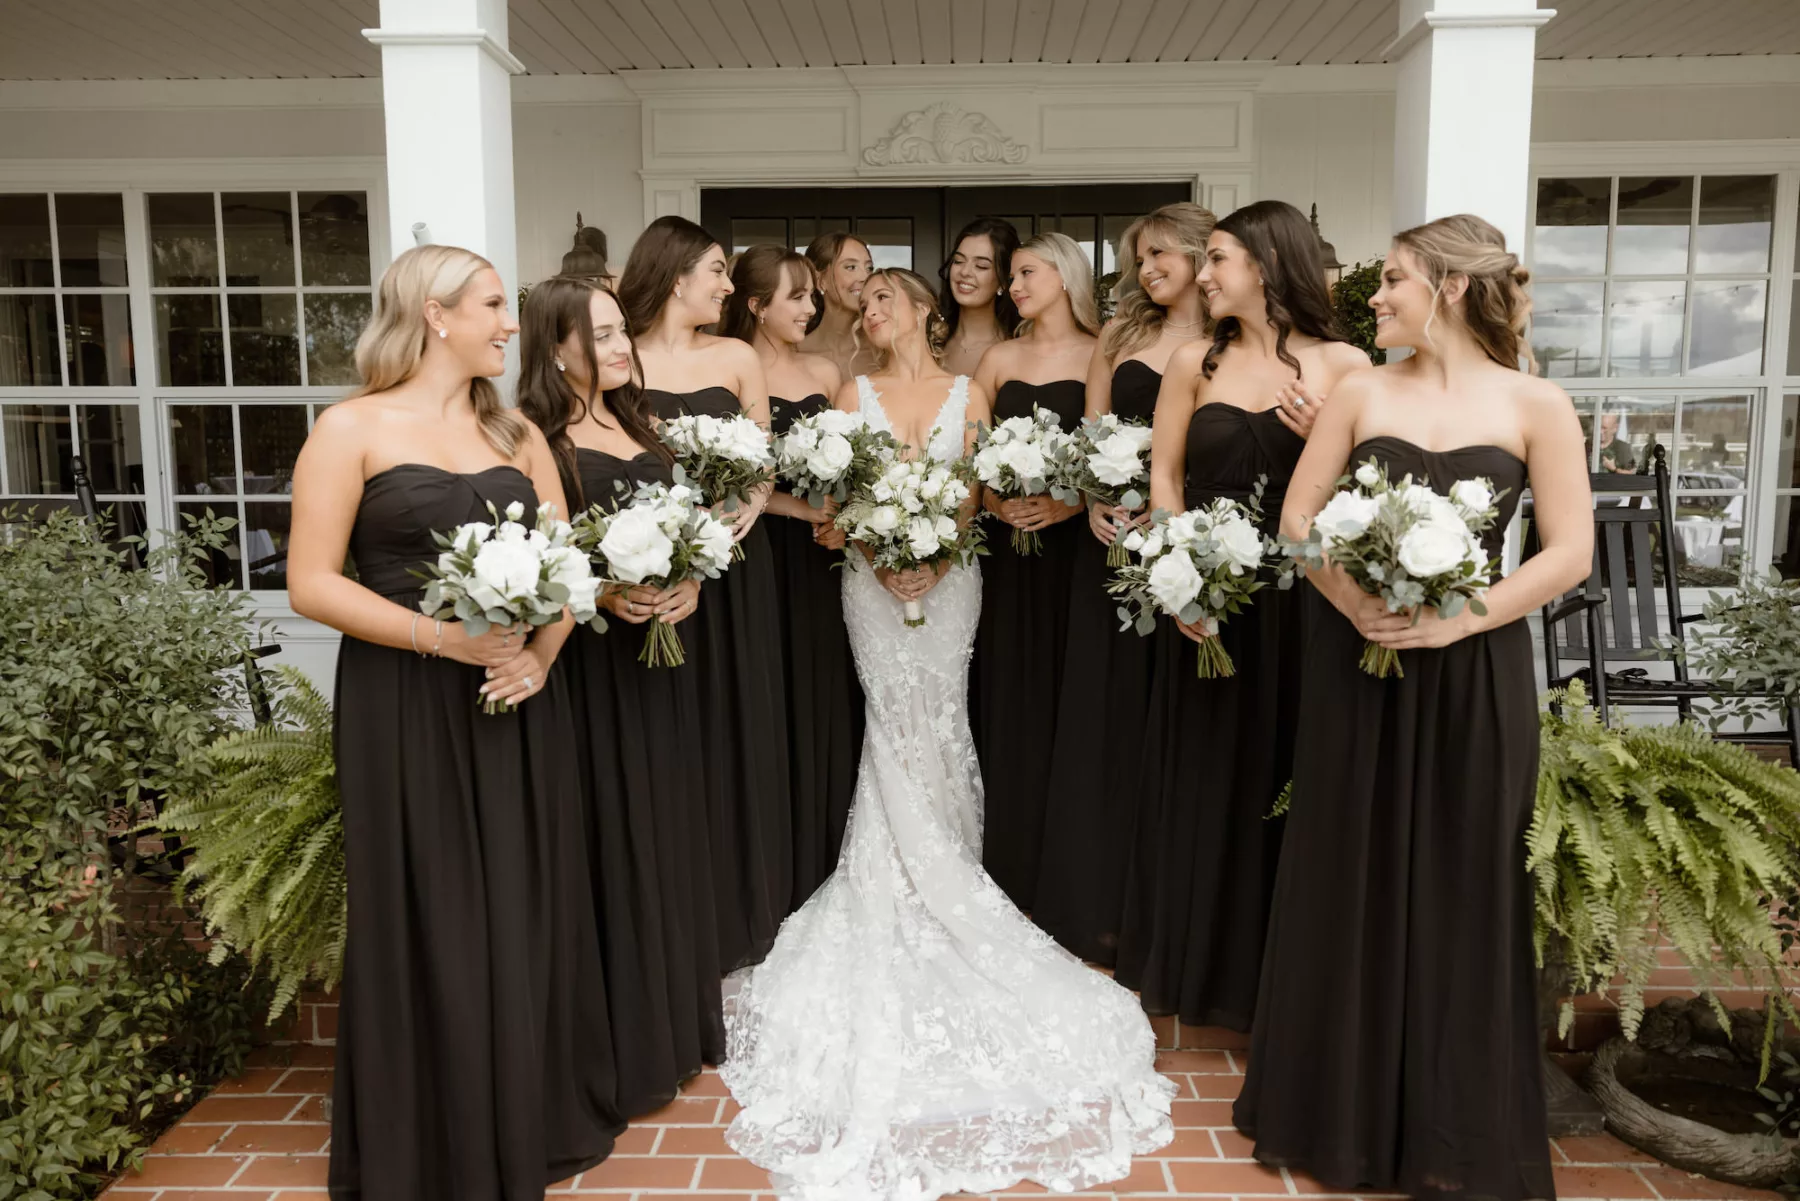 Matching Strapless Black Floor-length Bridesmaids Dresses | Timeless Black and White Wedding Attire Inspiration | Central Florida Hair and Makeup Femme Akoi Beauty Studio